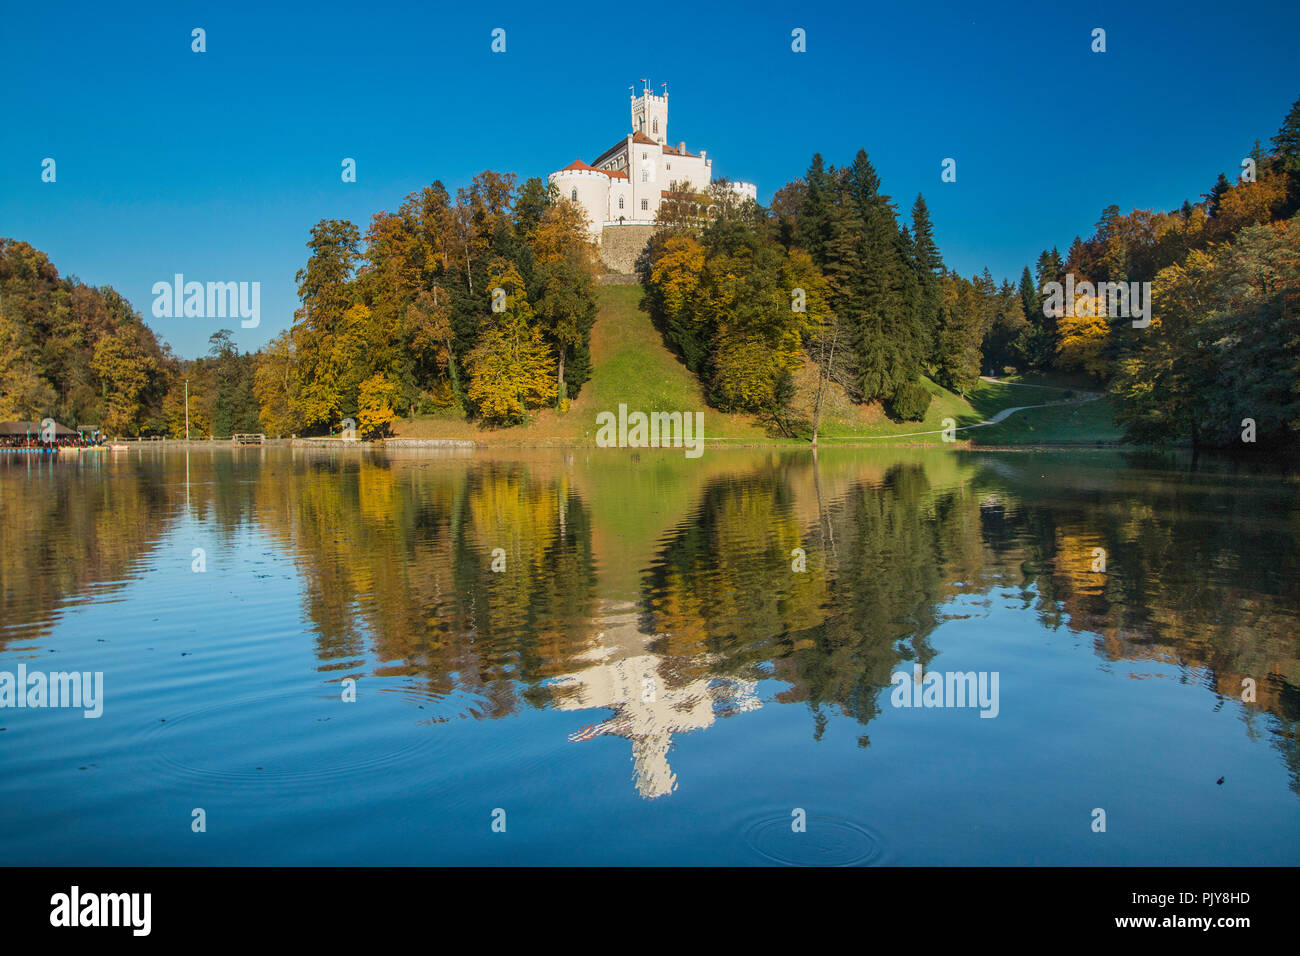 Castle of Trakoscan on the hill in autumn, Zagorje, Croatia, reflection on the lake Stock Photo